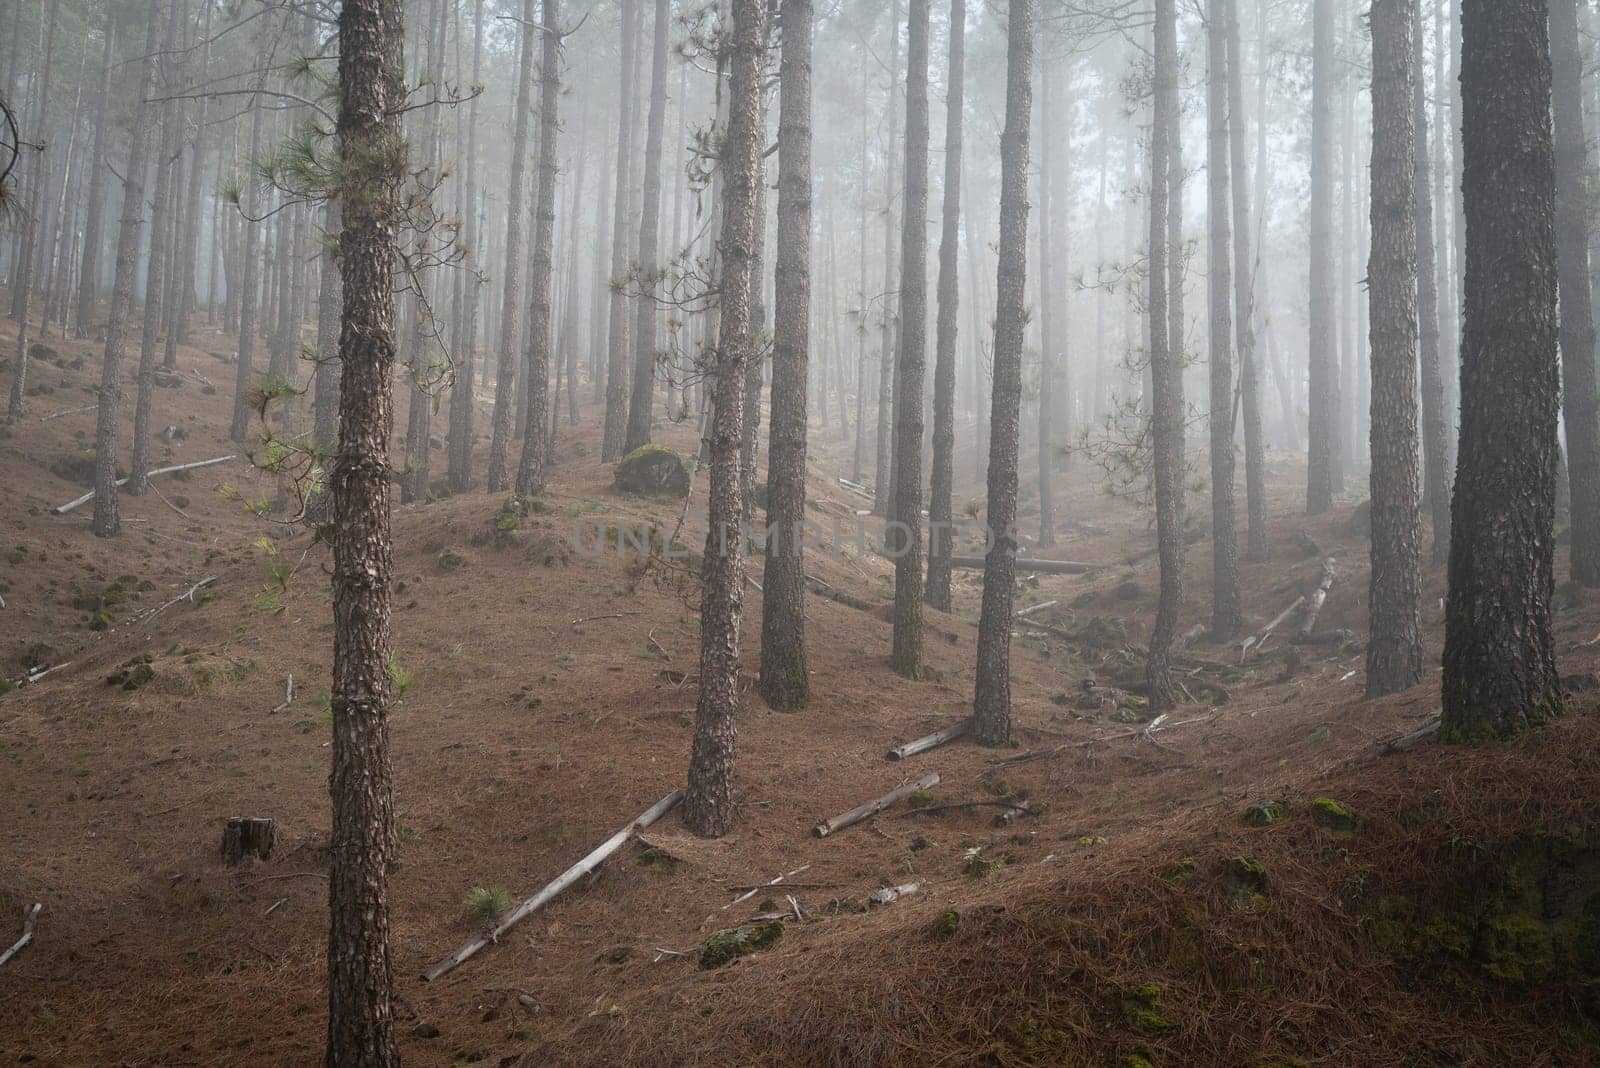 Foggy forest landscape with a path between pines with logs in the way. Uneven hilly ground. Mysterious misty day in the woods. Hiking in a cloud. Mostly blurred horizontal photo